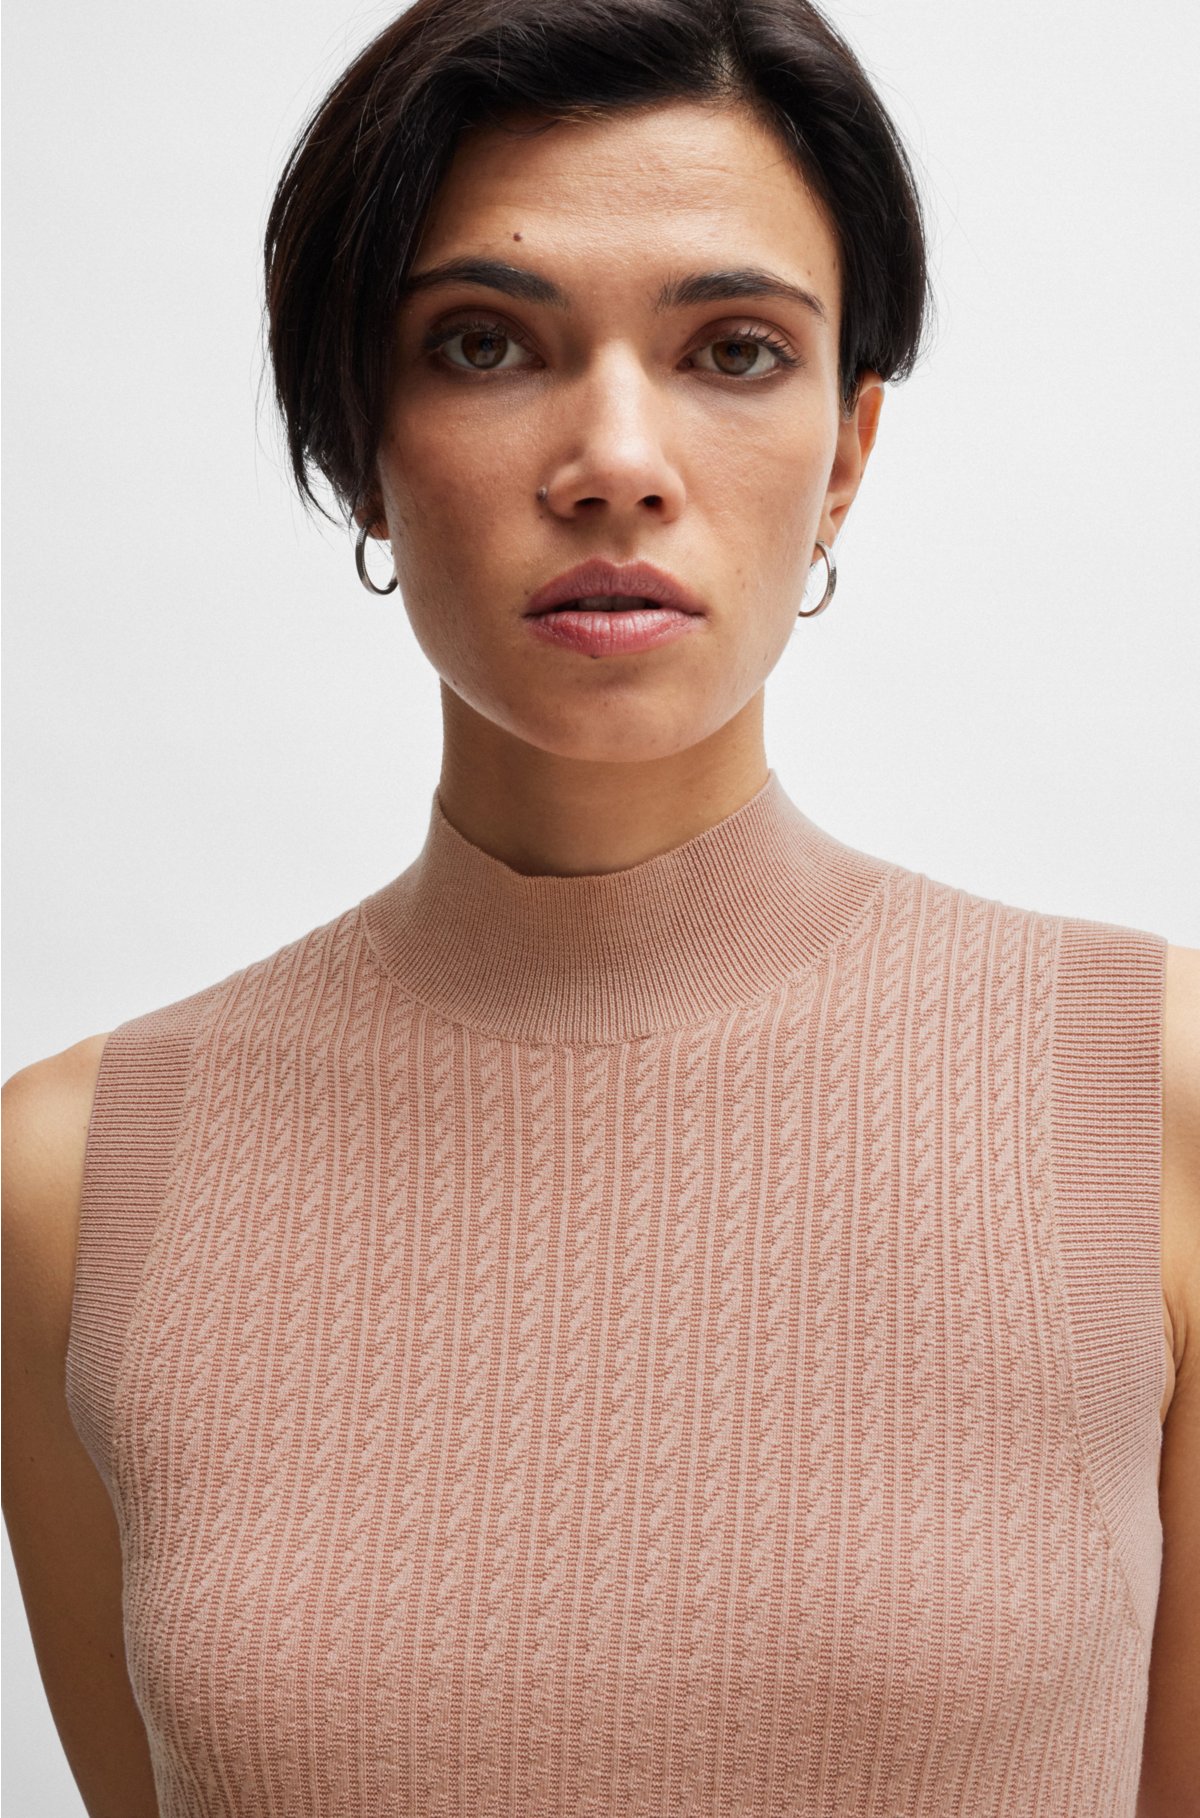 Cable-knit sleeveless top in silk and cotton, light pink